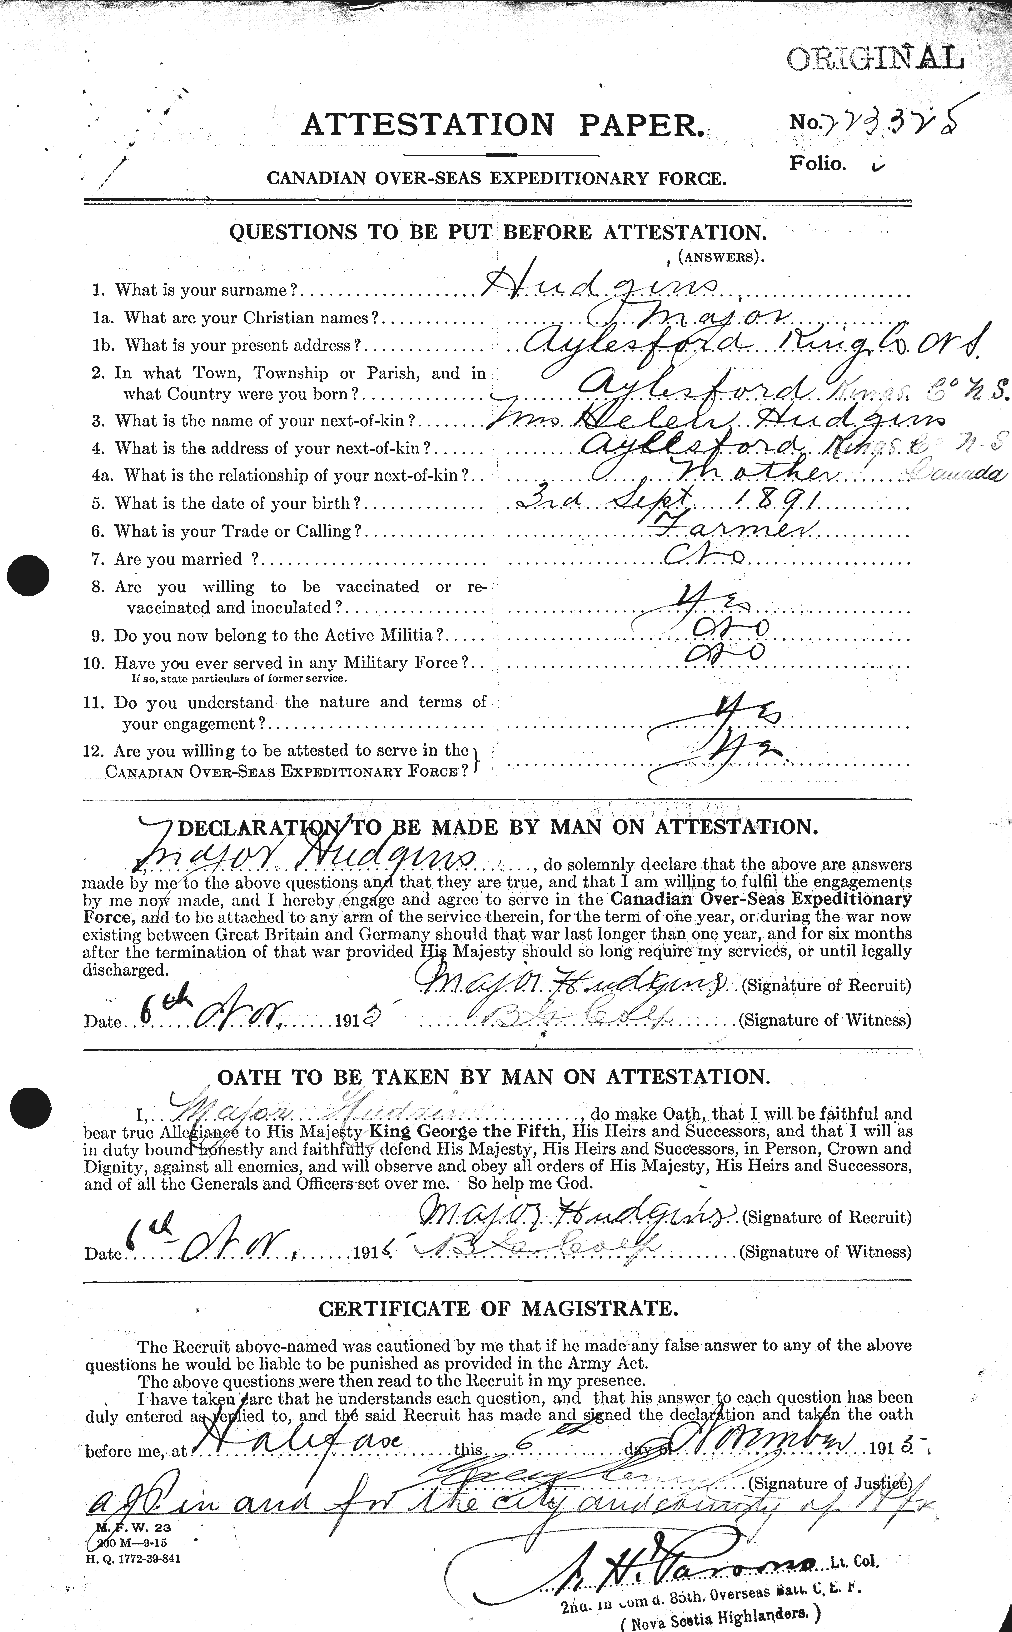 Personnel Records of the First World War - CEF 401883a